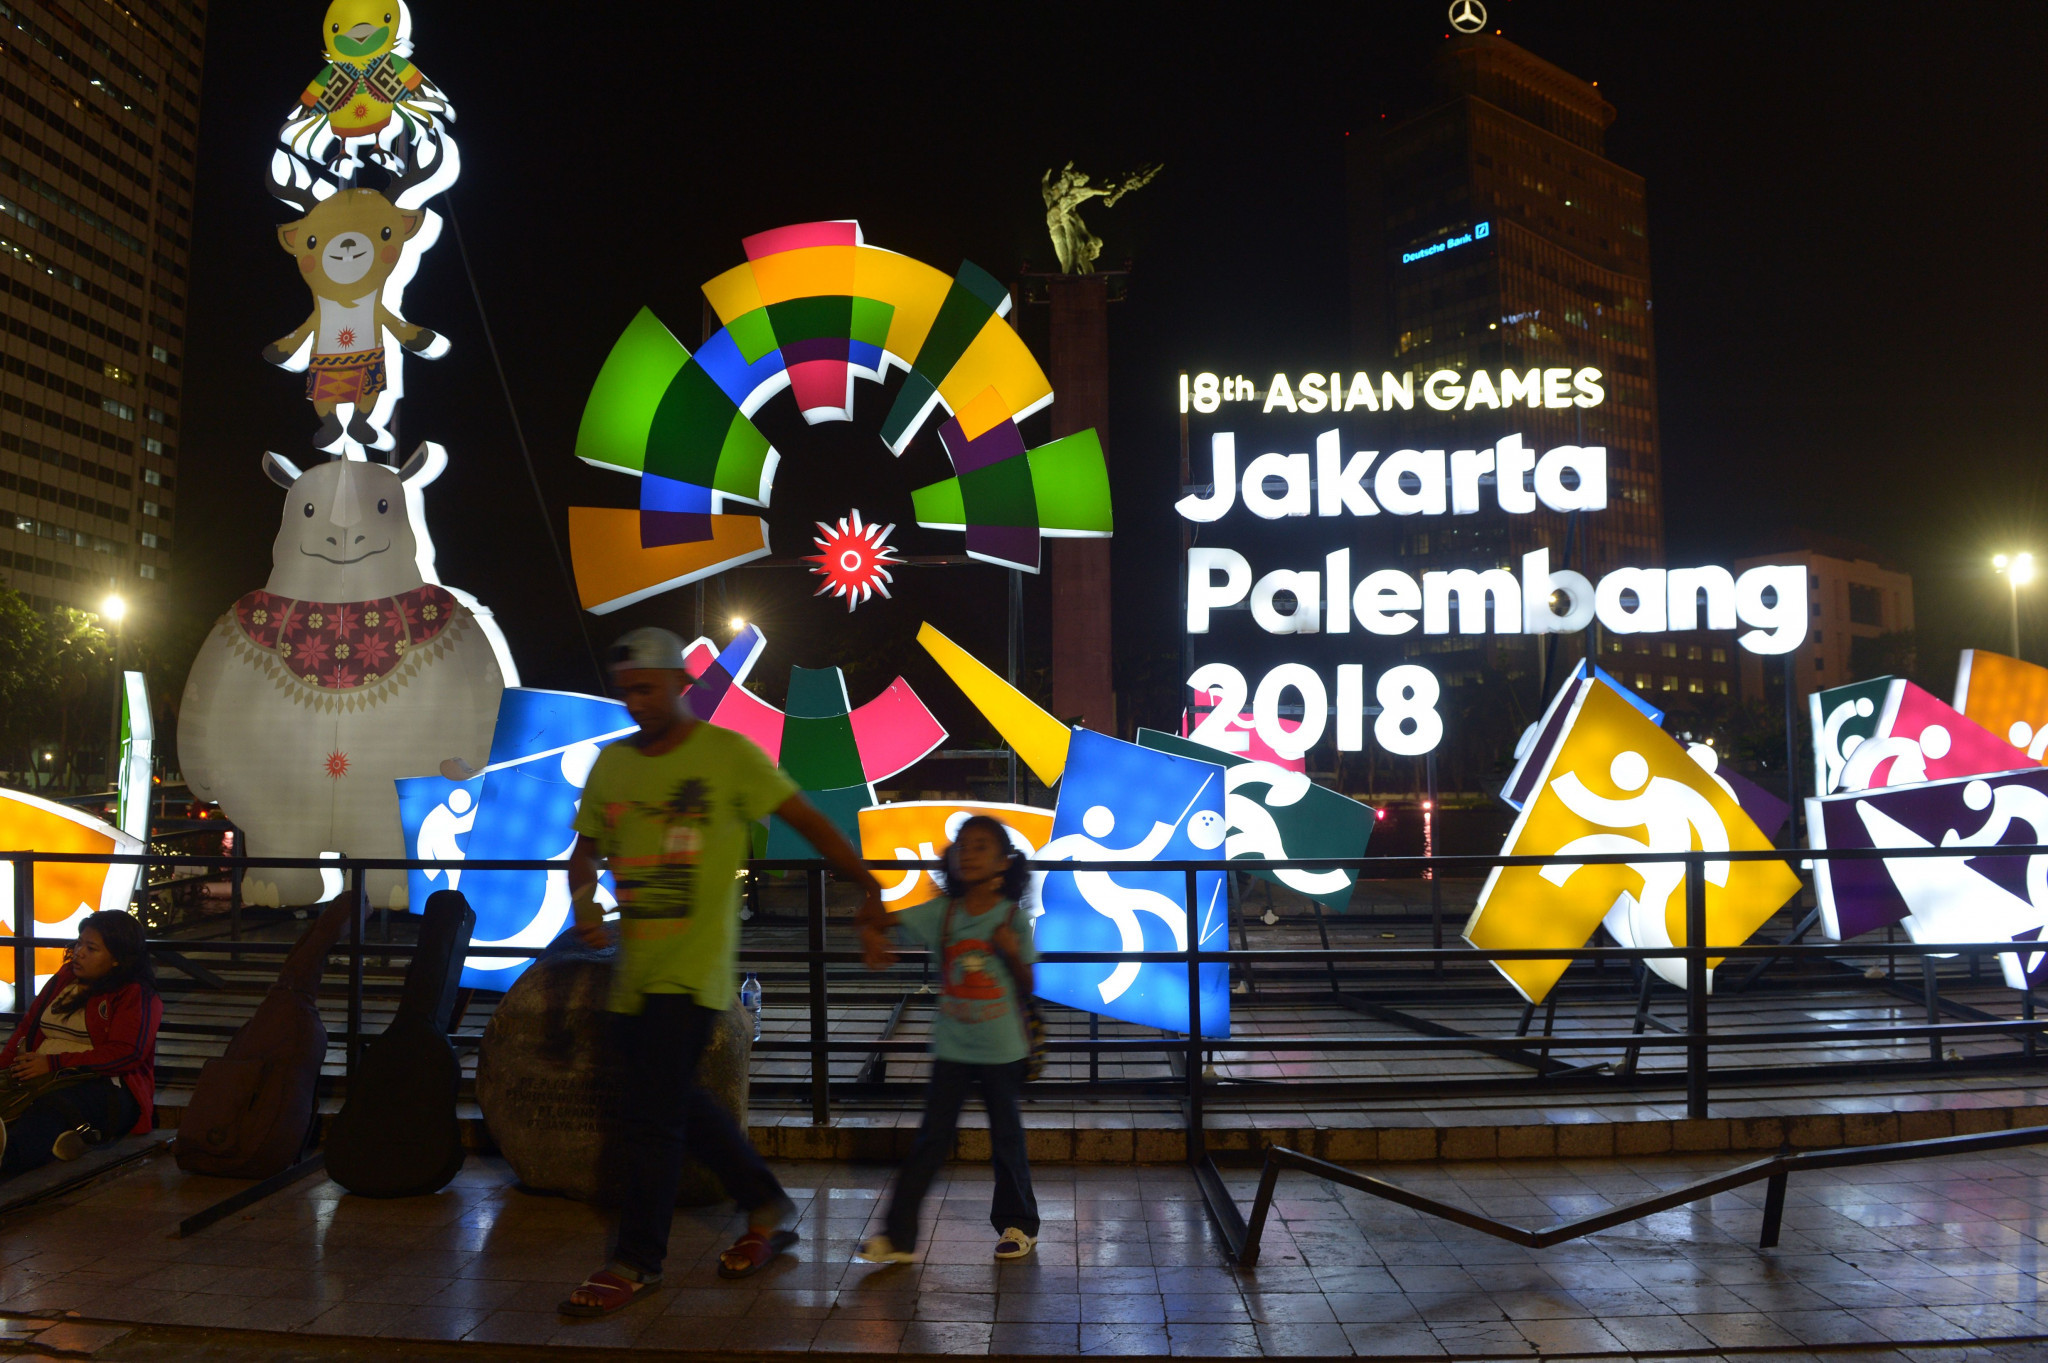 Preparations for the Jakarta Palembang Asian Games led discussions ©Getty Images